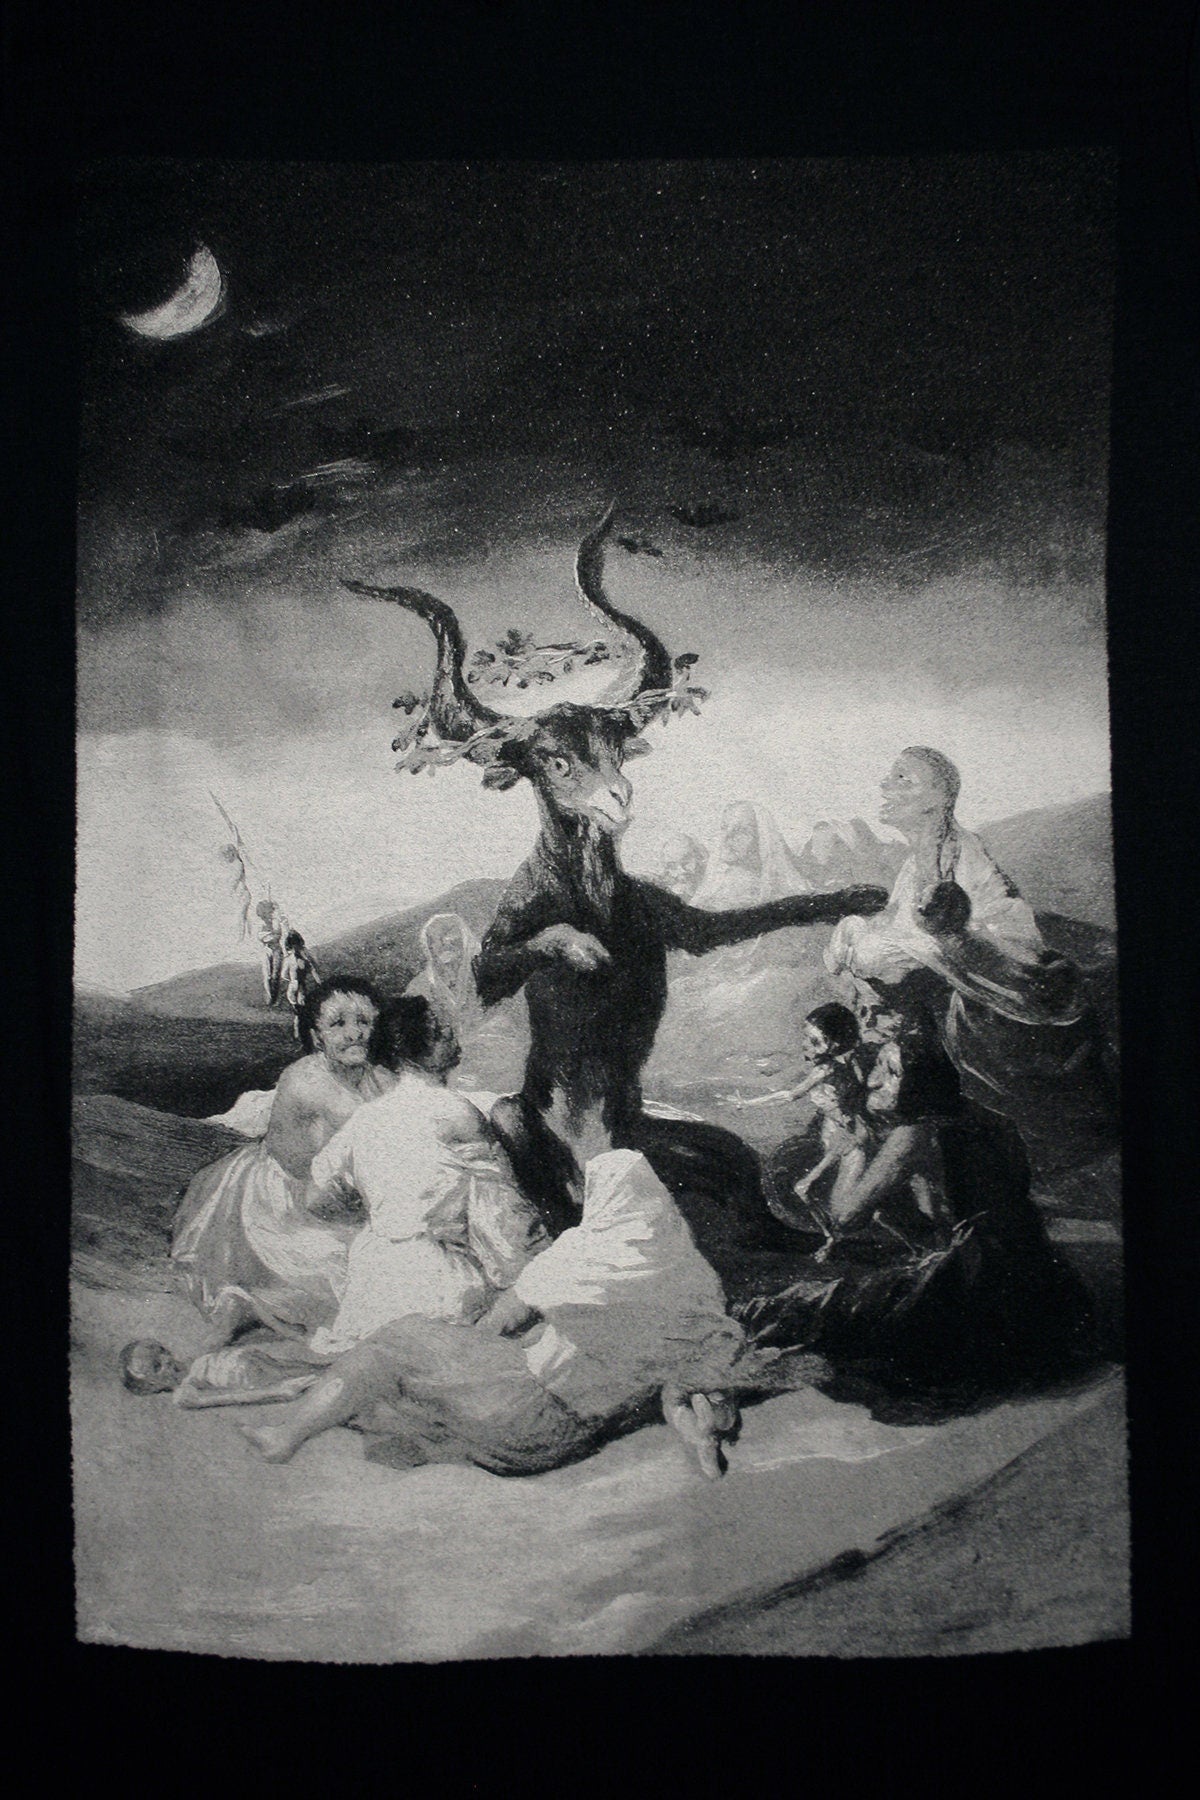 Witches' Sabbath (Goya, 1798) - T-shirt female fitted